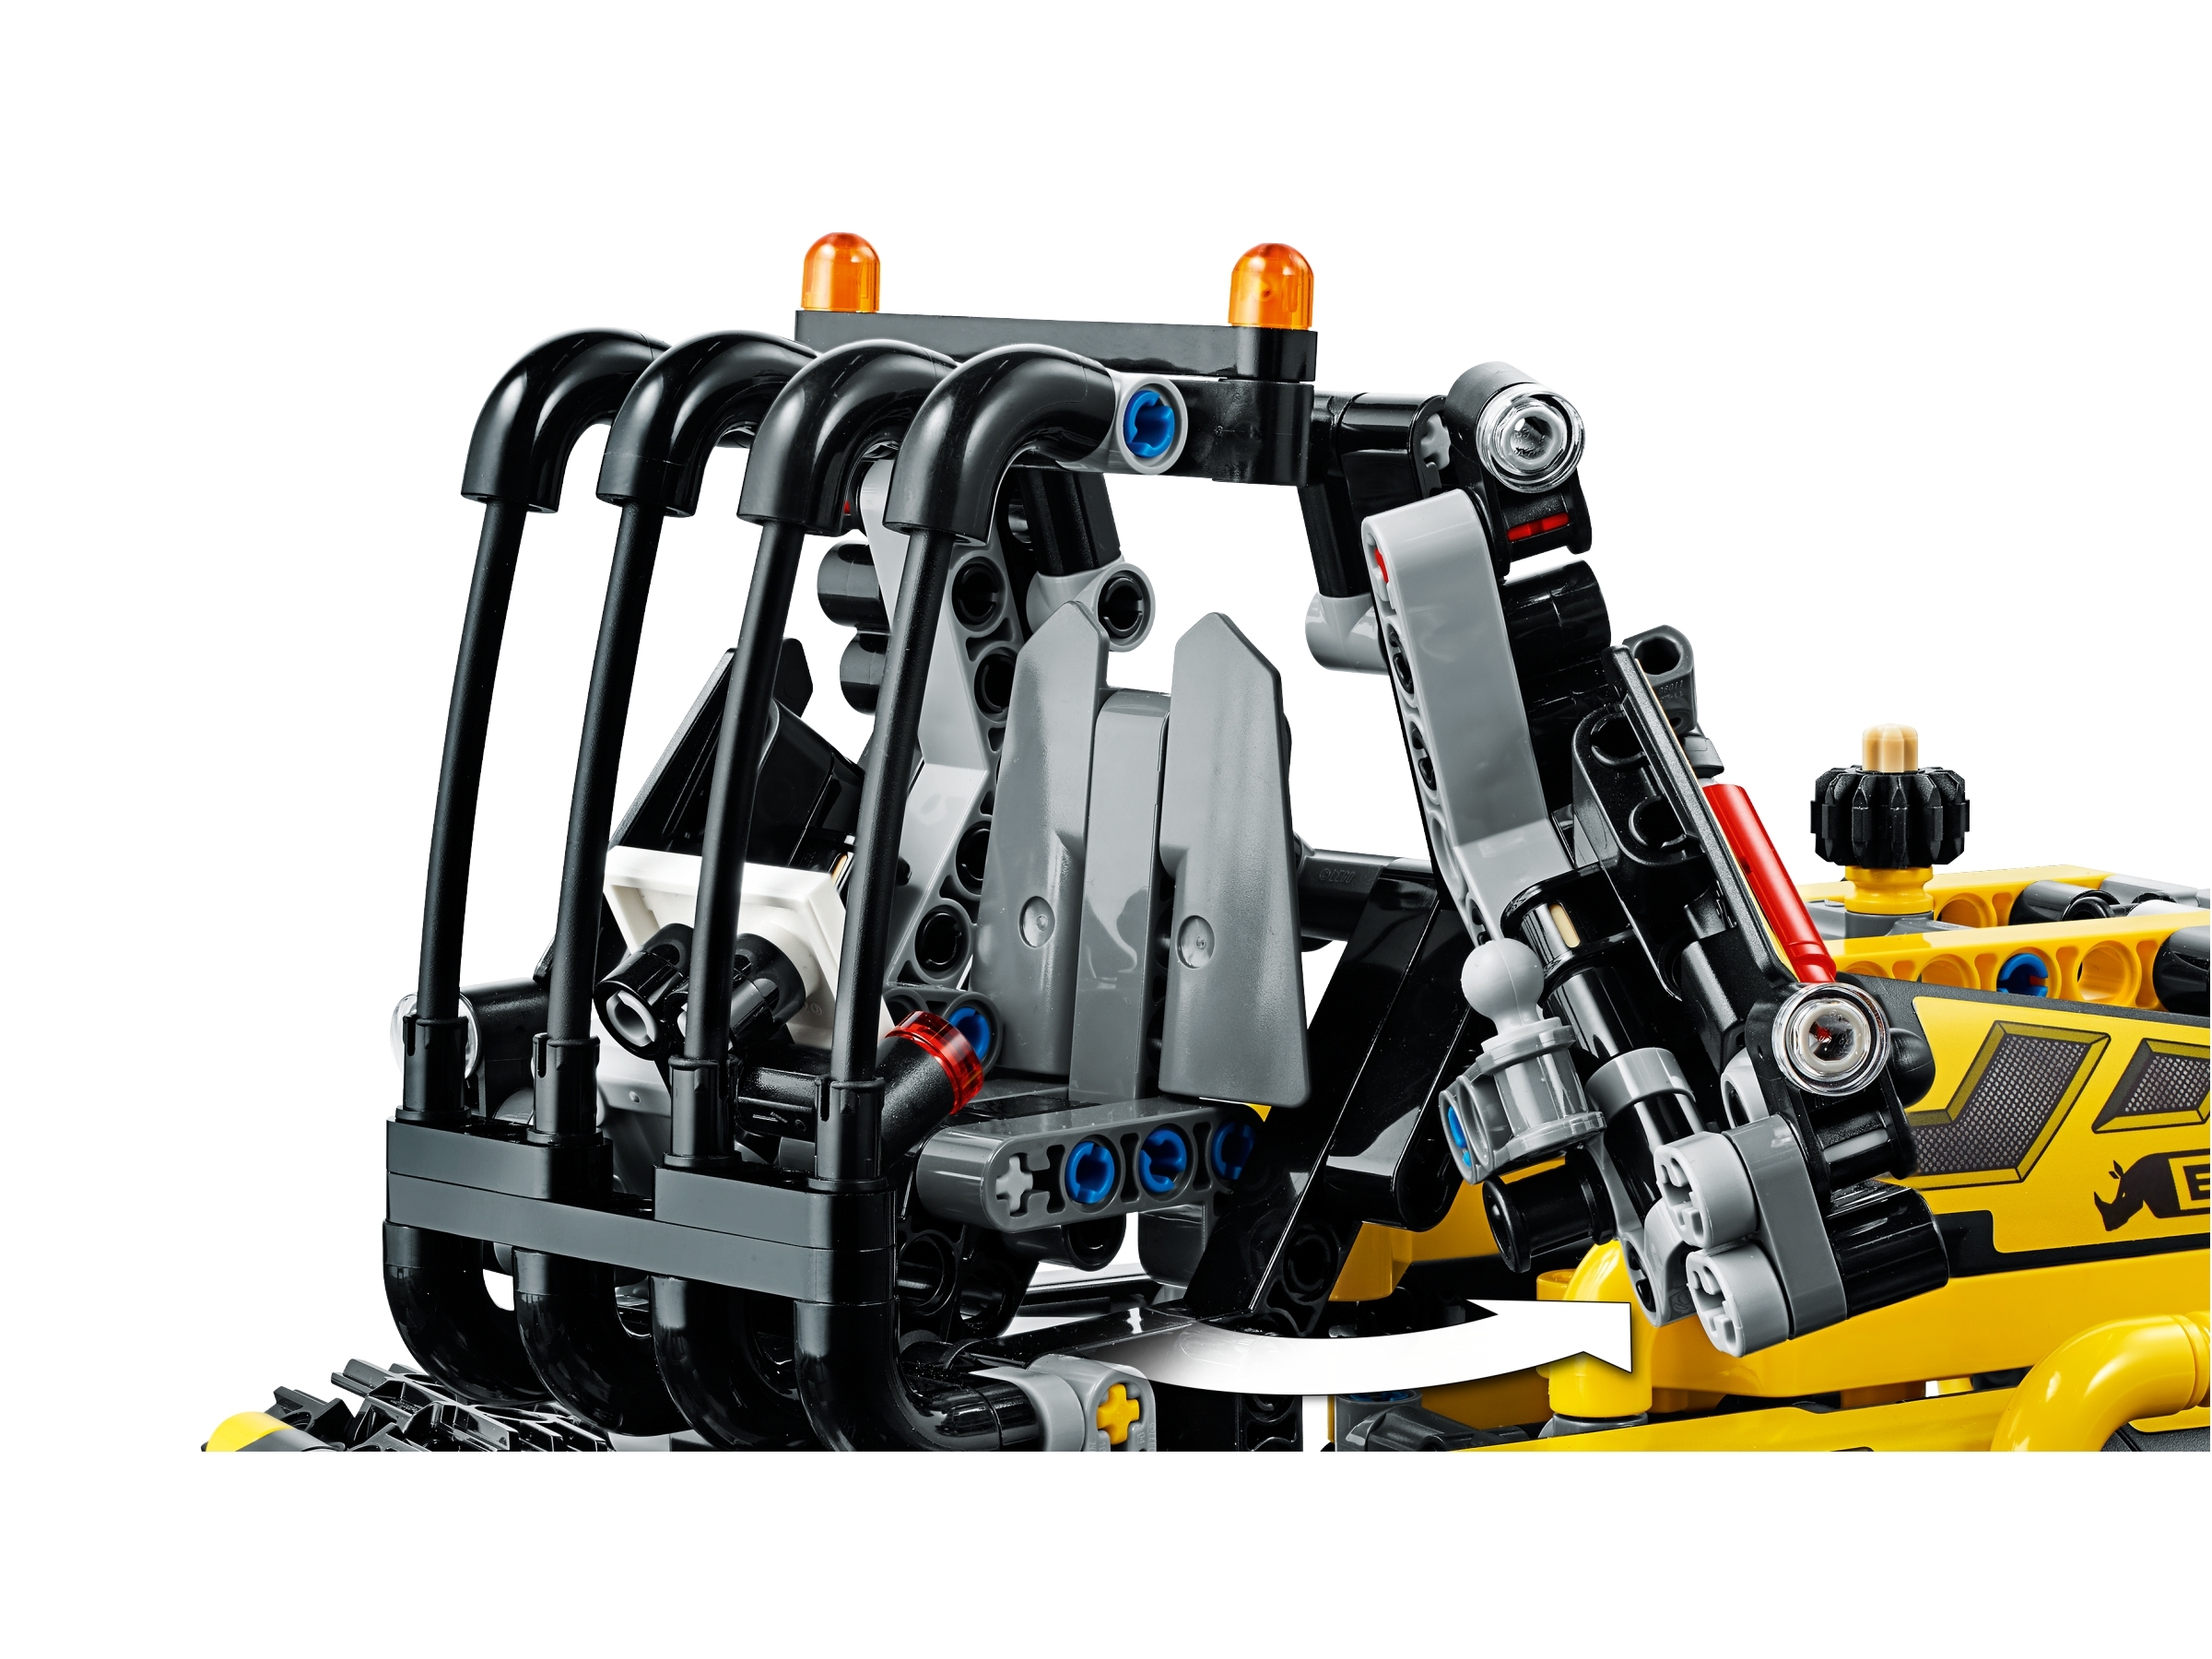 Tracked Loader | Technic™ | Buy online at the Official LEGO® Shop US